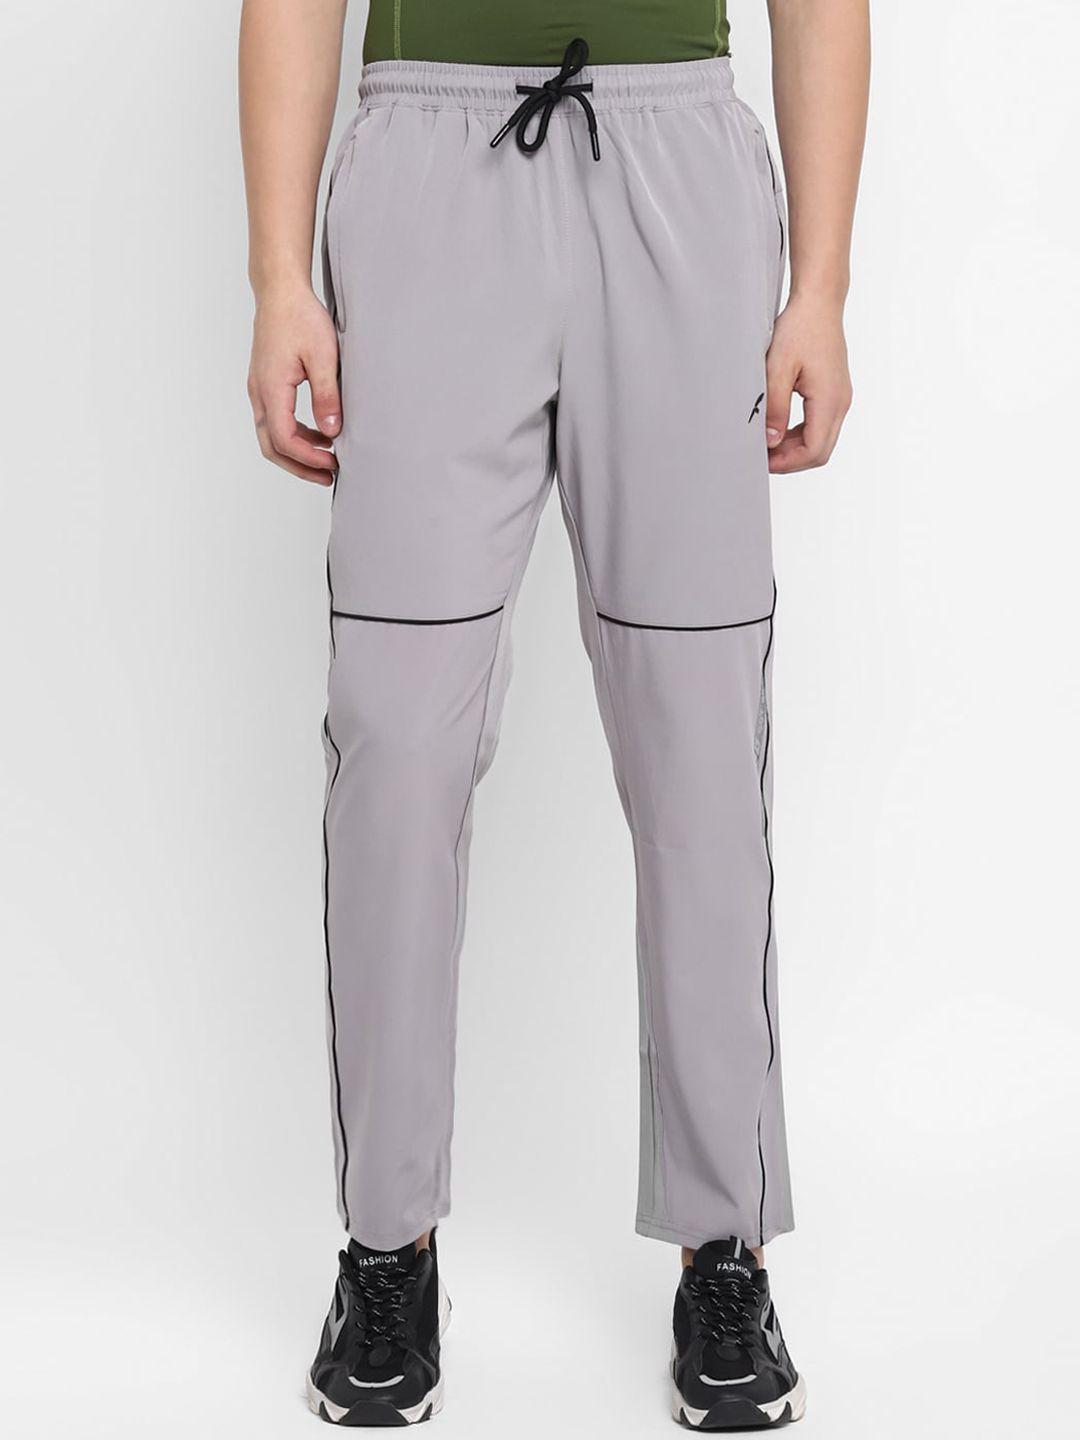 furo-by-red-chief-men-grey-track-pants